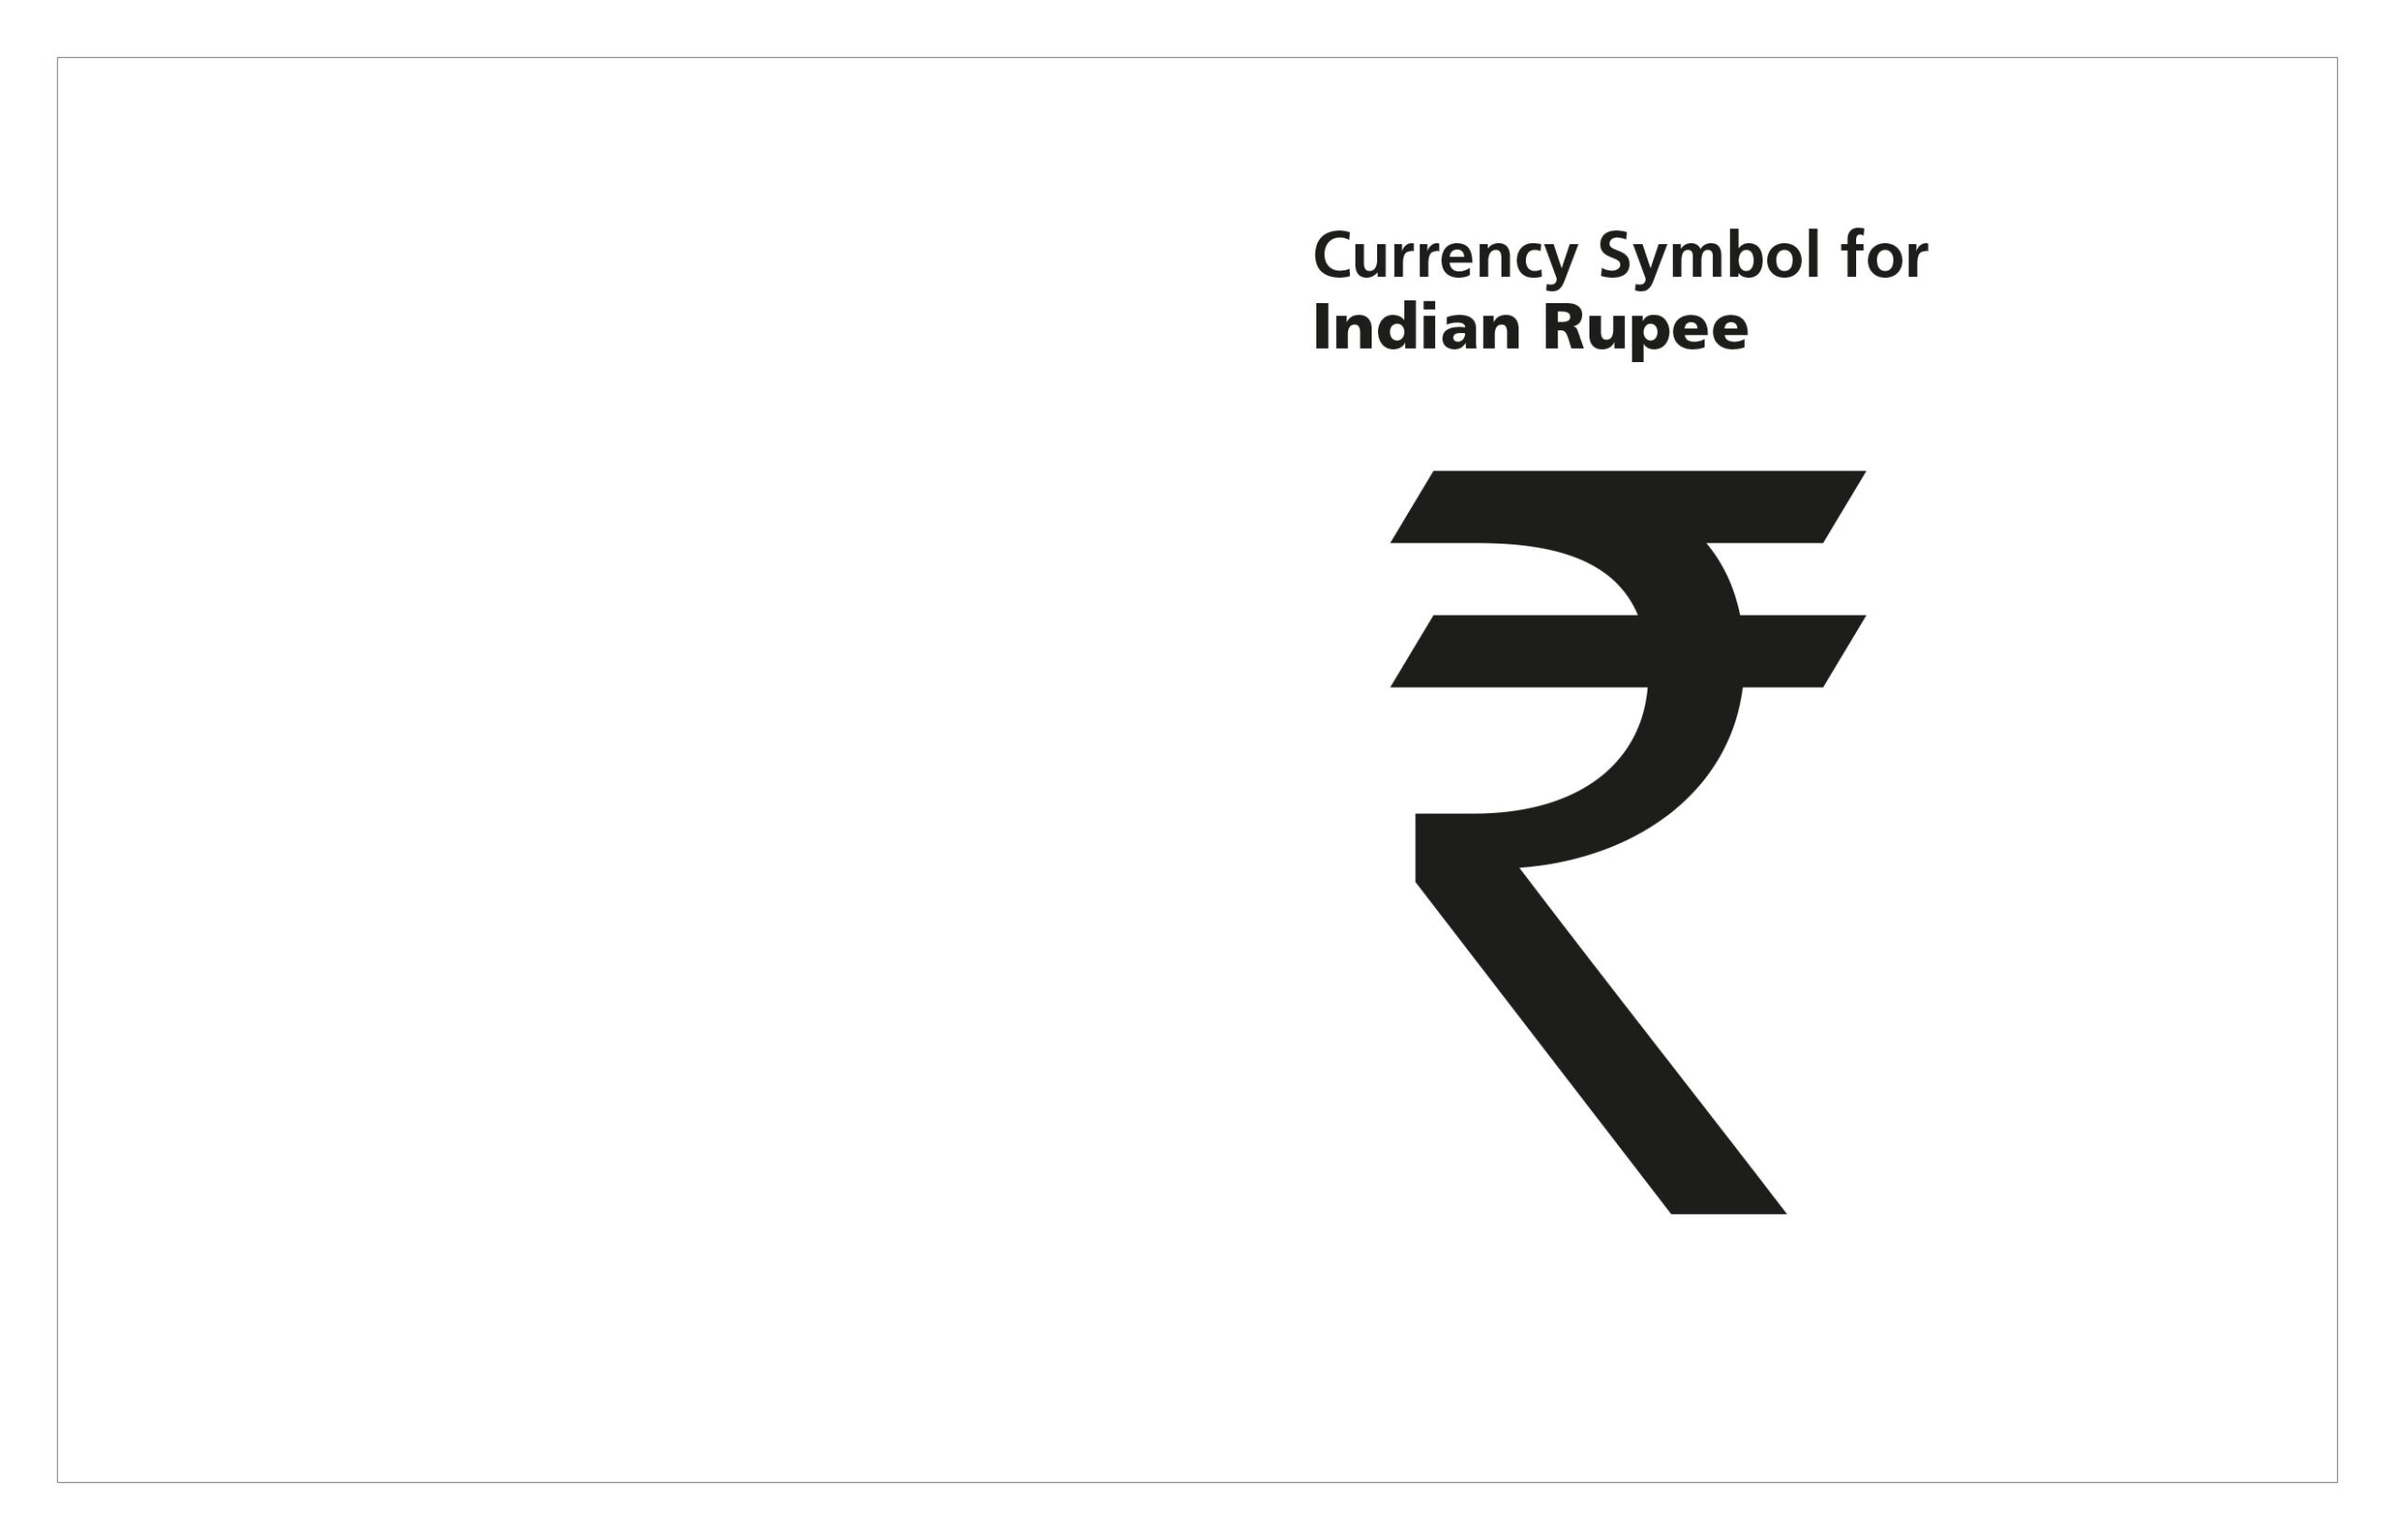 ISO Currency Codes and Symbols for Exchange Rates and Global Payments